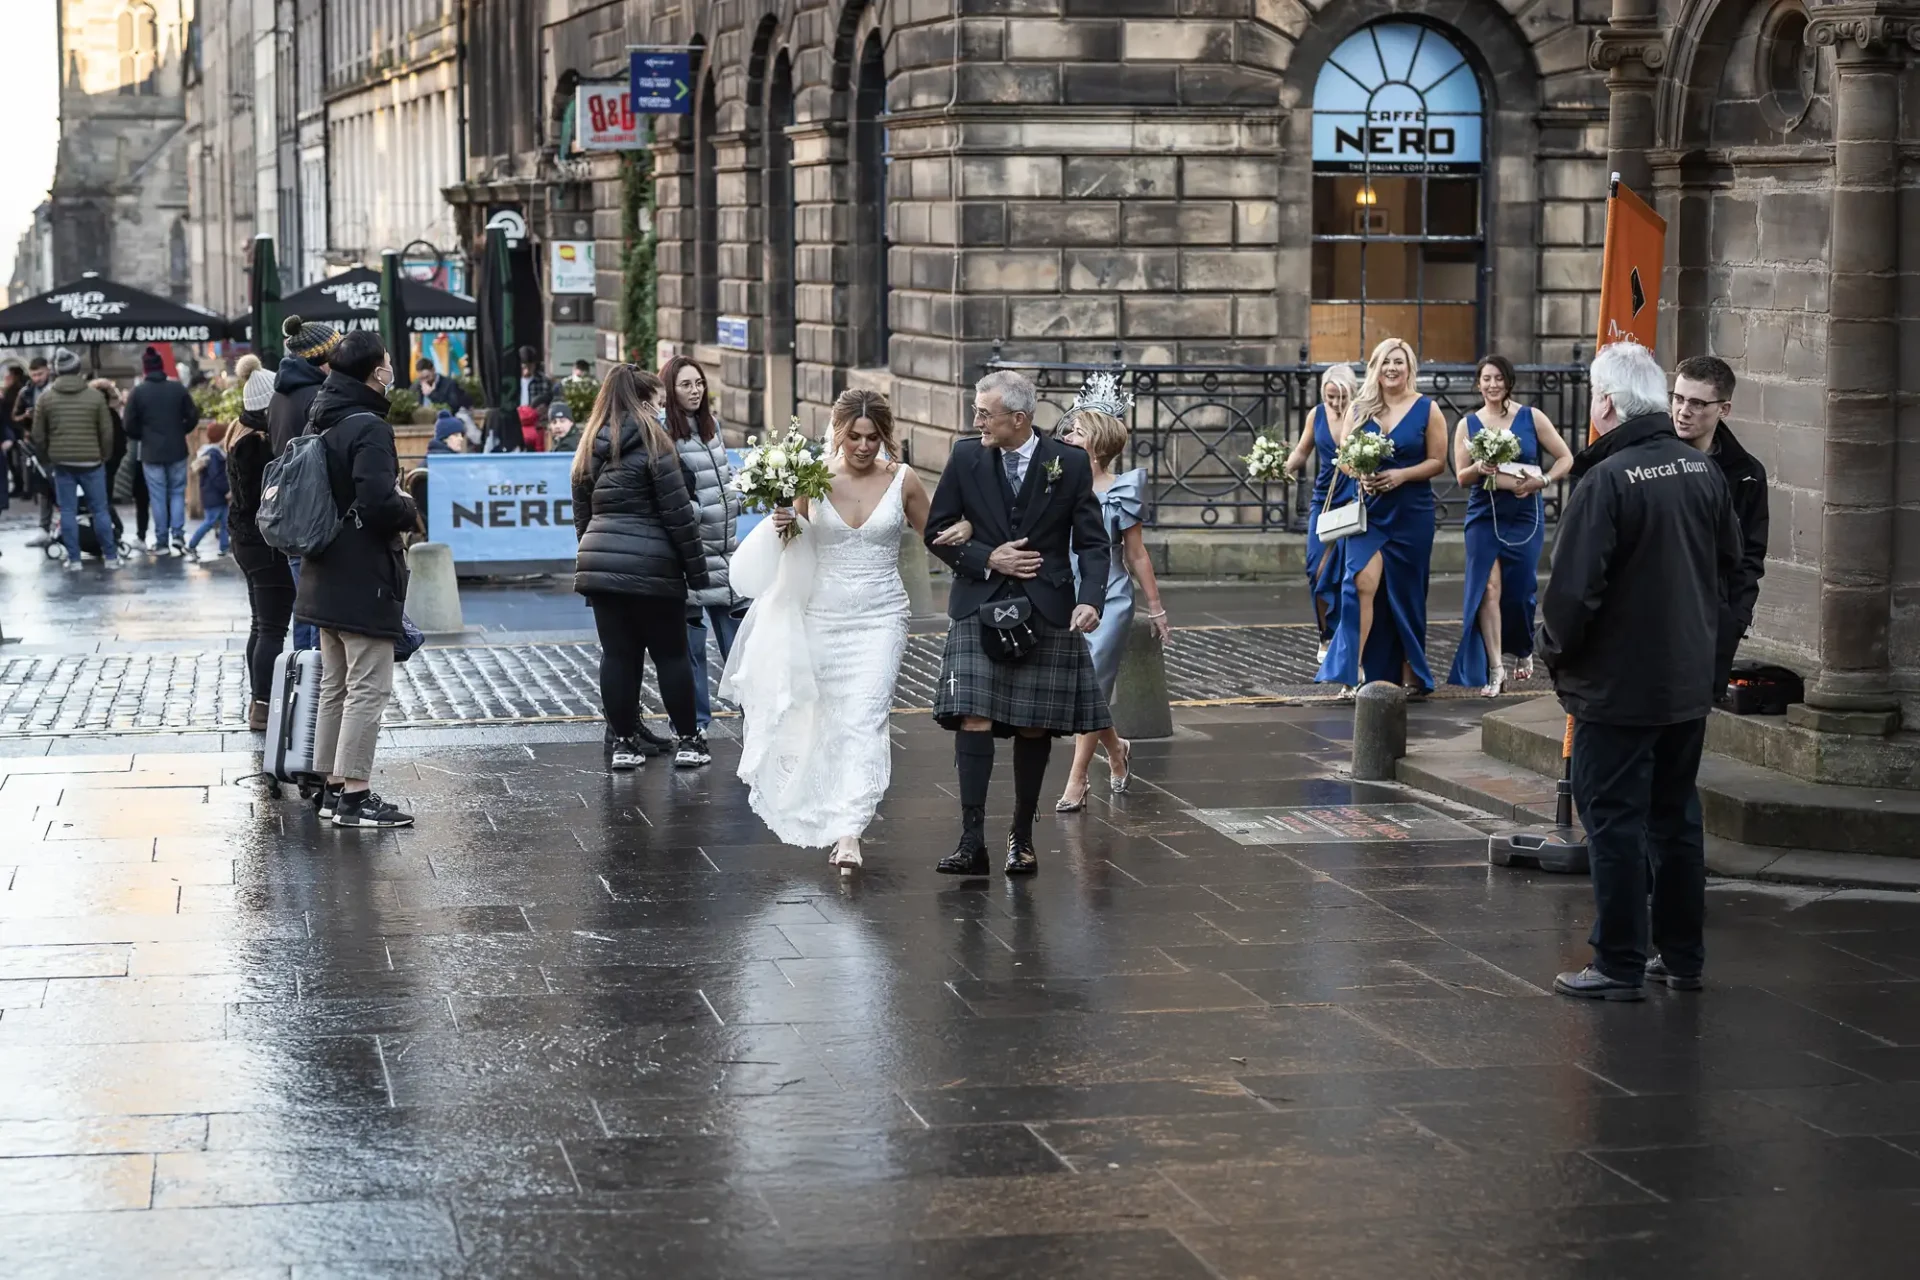 A bride in a white dress, escorted by an older man, walks through a bustling city street with onlookers, some in kilts.